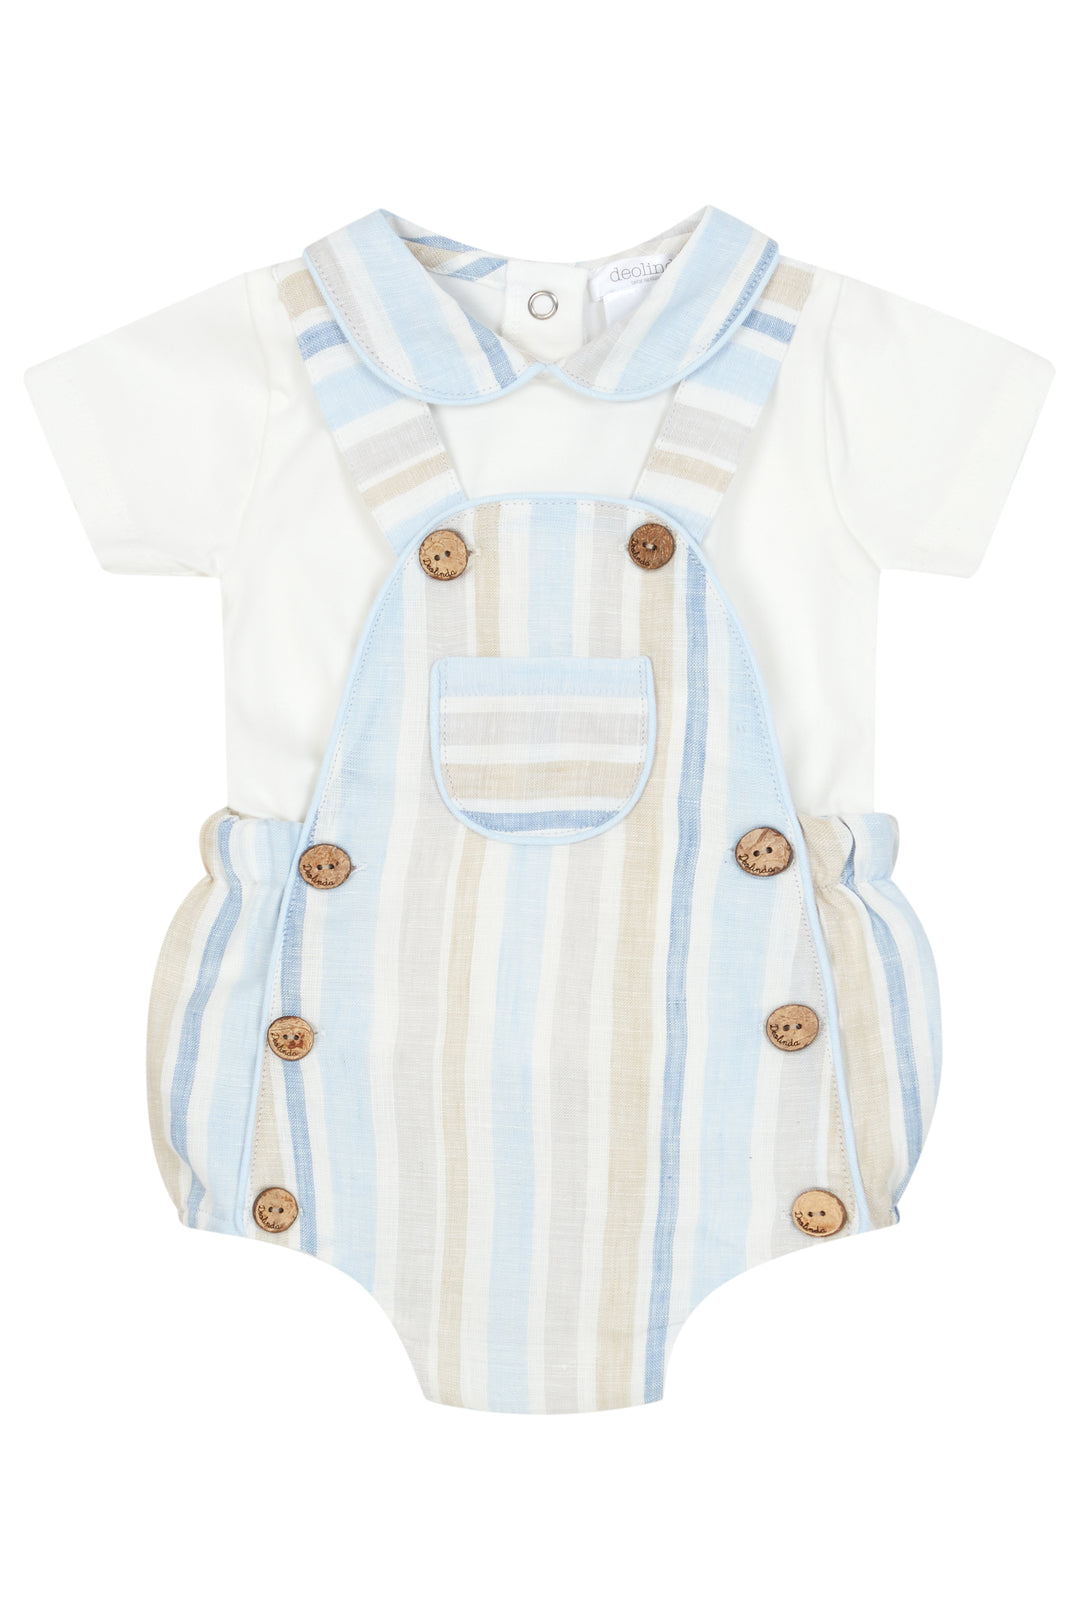 Chic by Deolinda PREORDER "Beau" Blue Striped Dungaree Romper Set | Millie and John